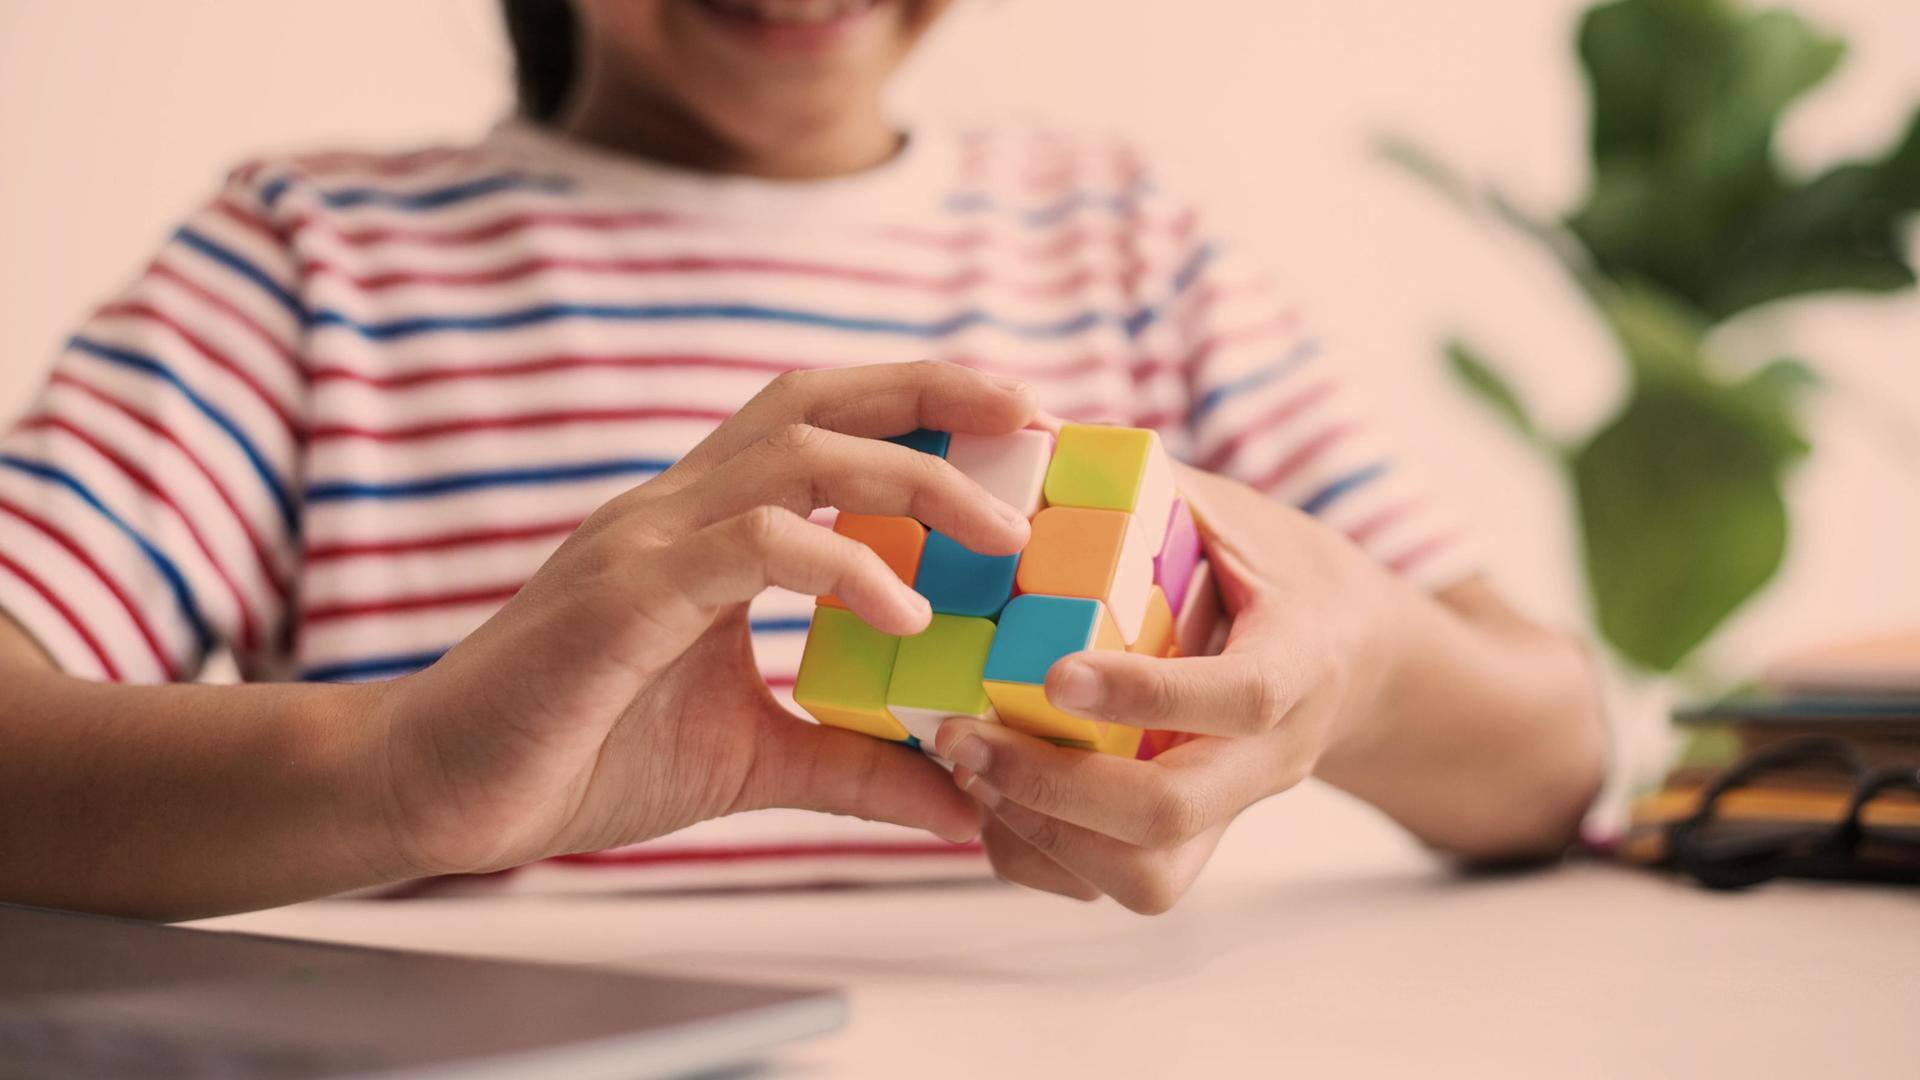 Let your kids play these brain games to grow smart